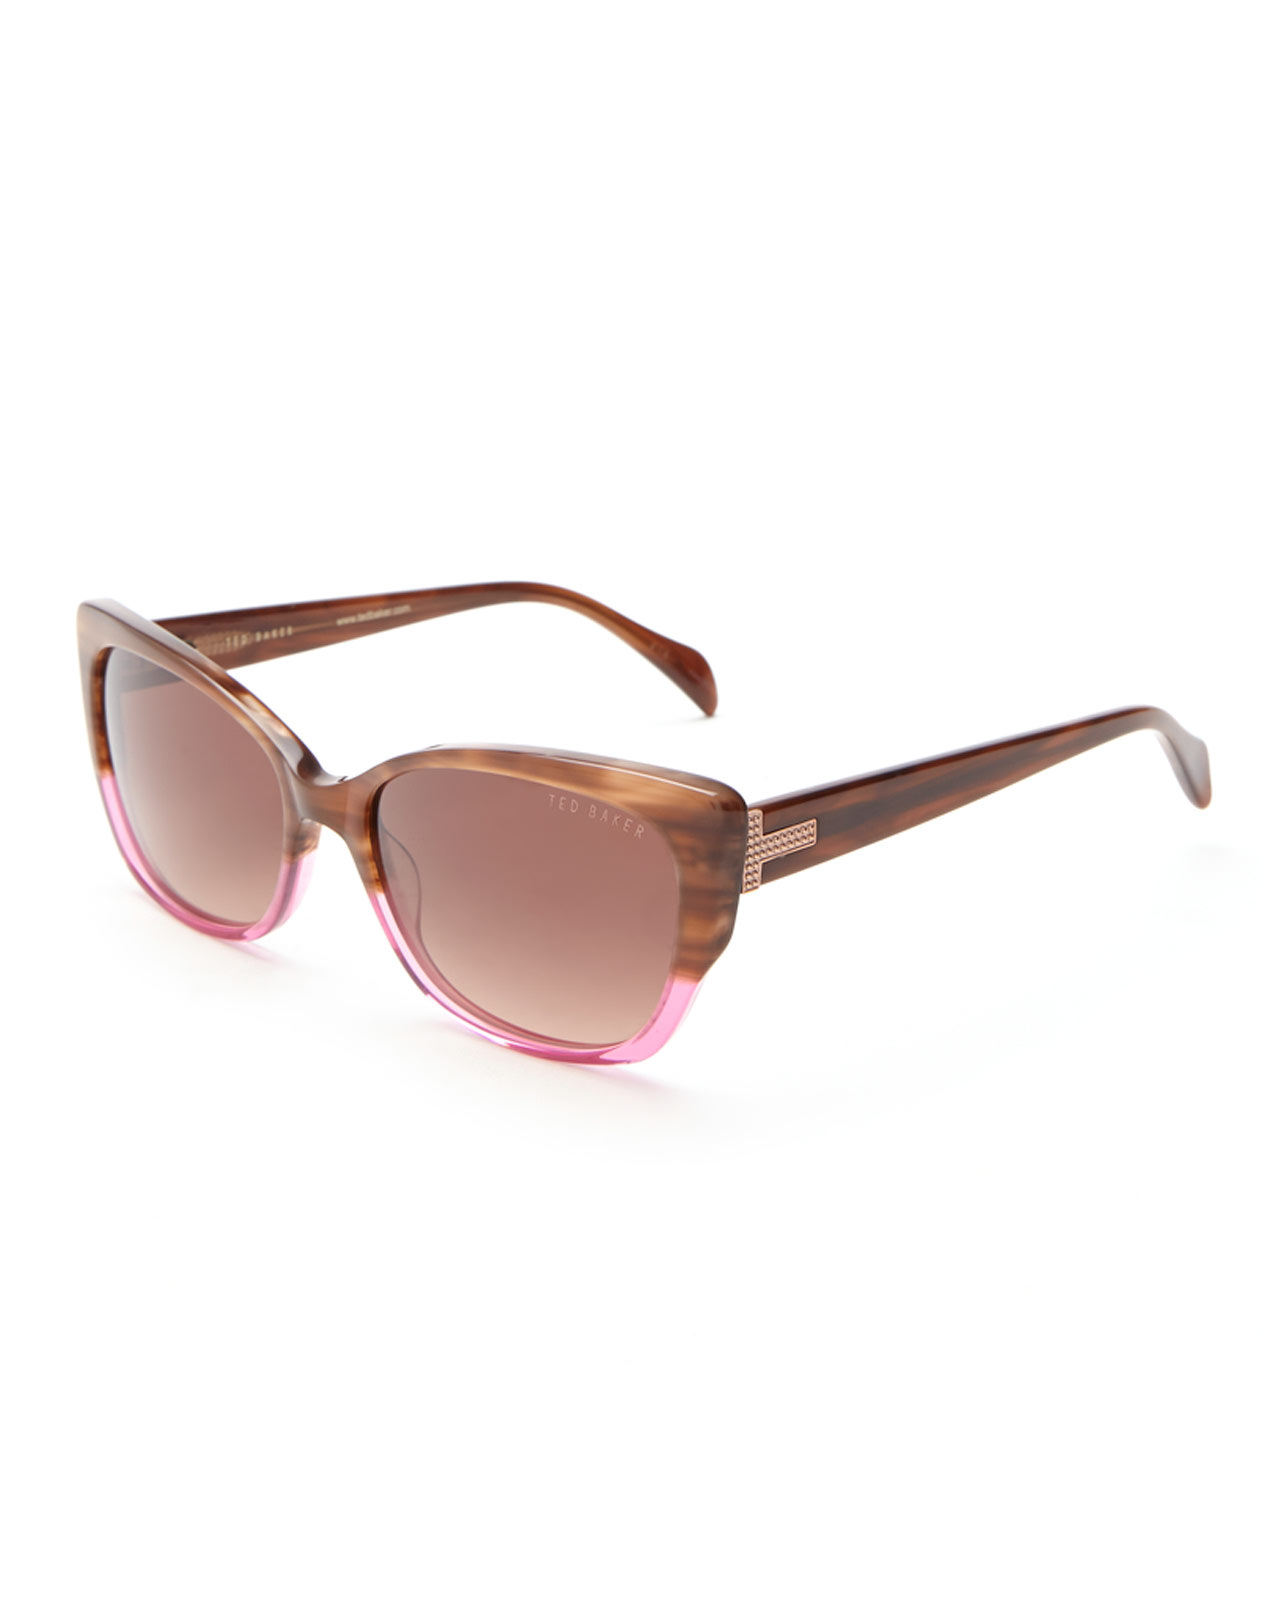 Lyst - Ted baker B577 Brown & Pink Ombrã© Cat Eye Sunglasses in Brown